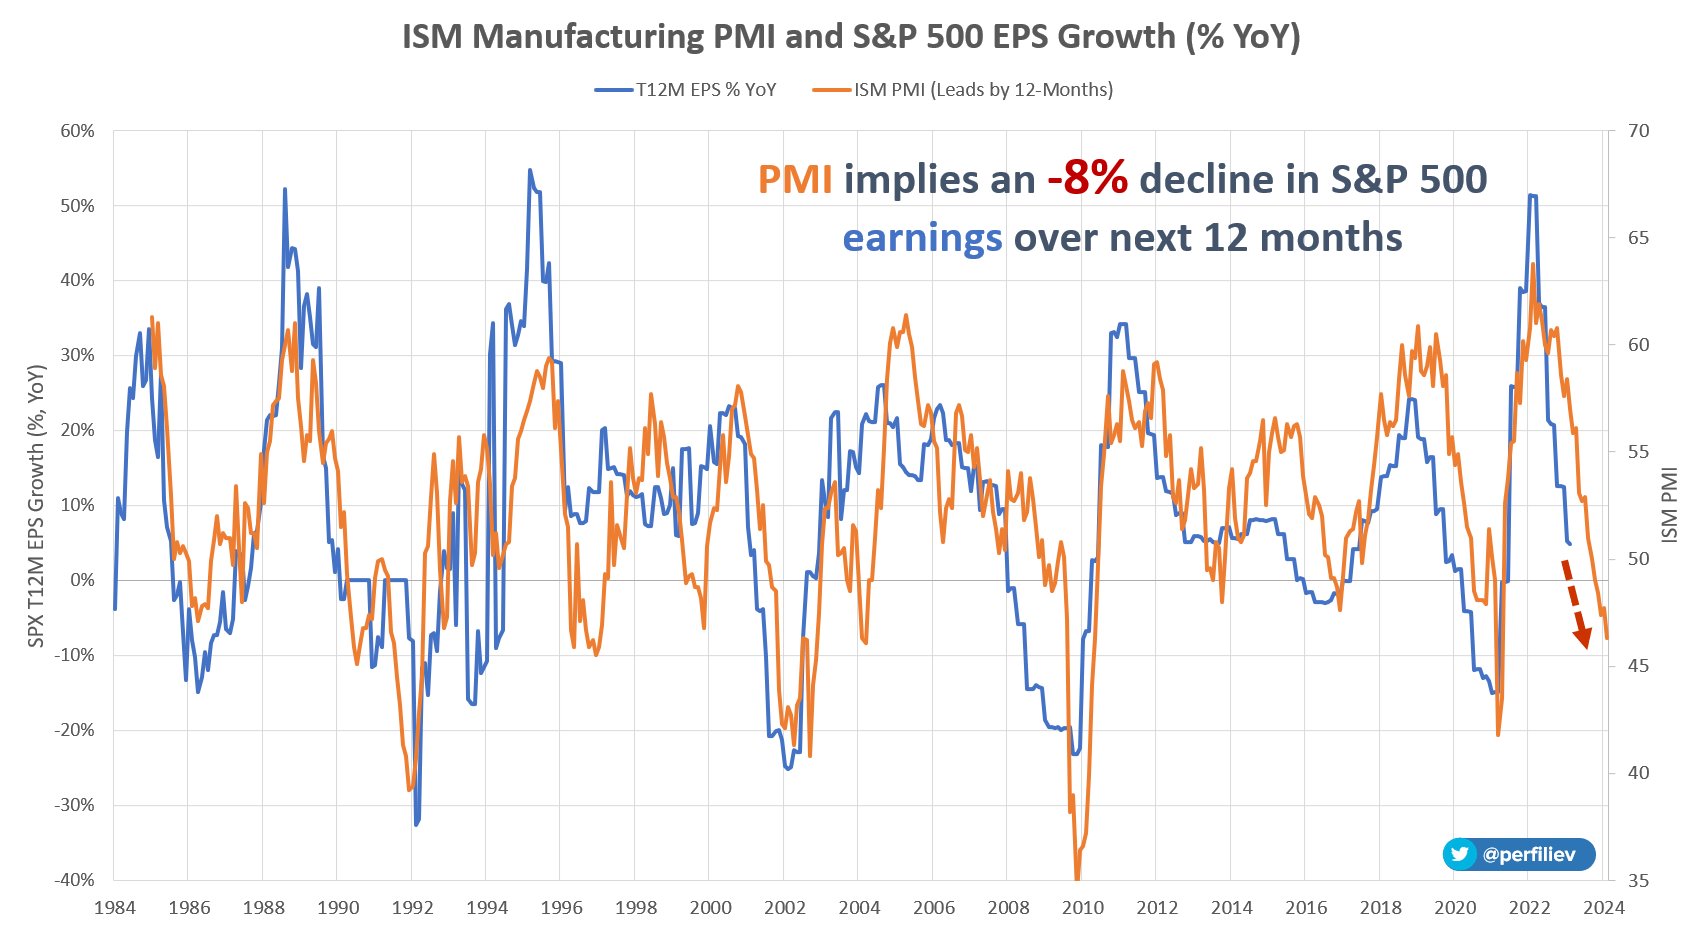 ISM PMI and S&P500 EPS Growth